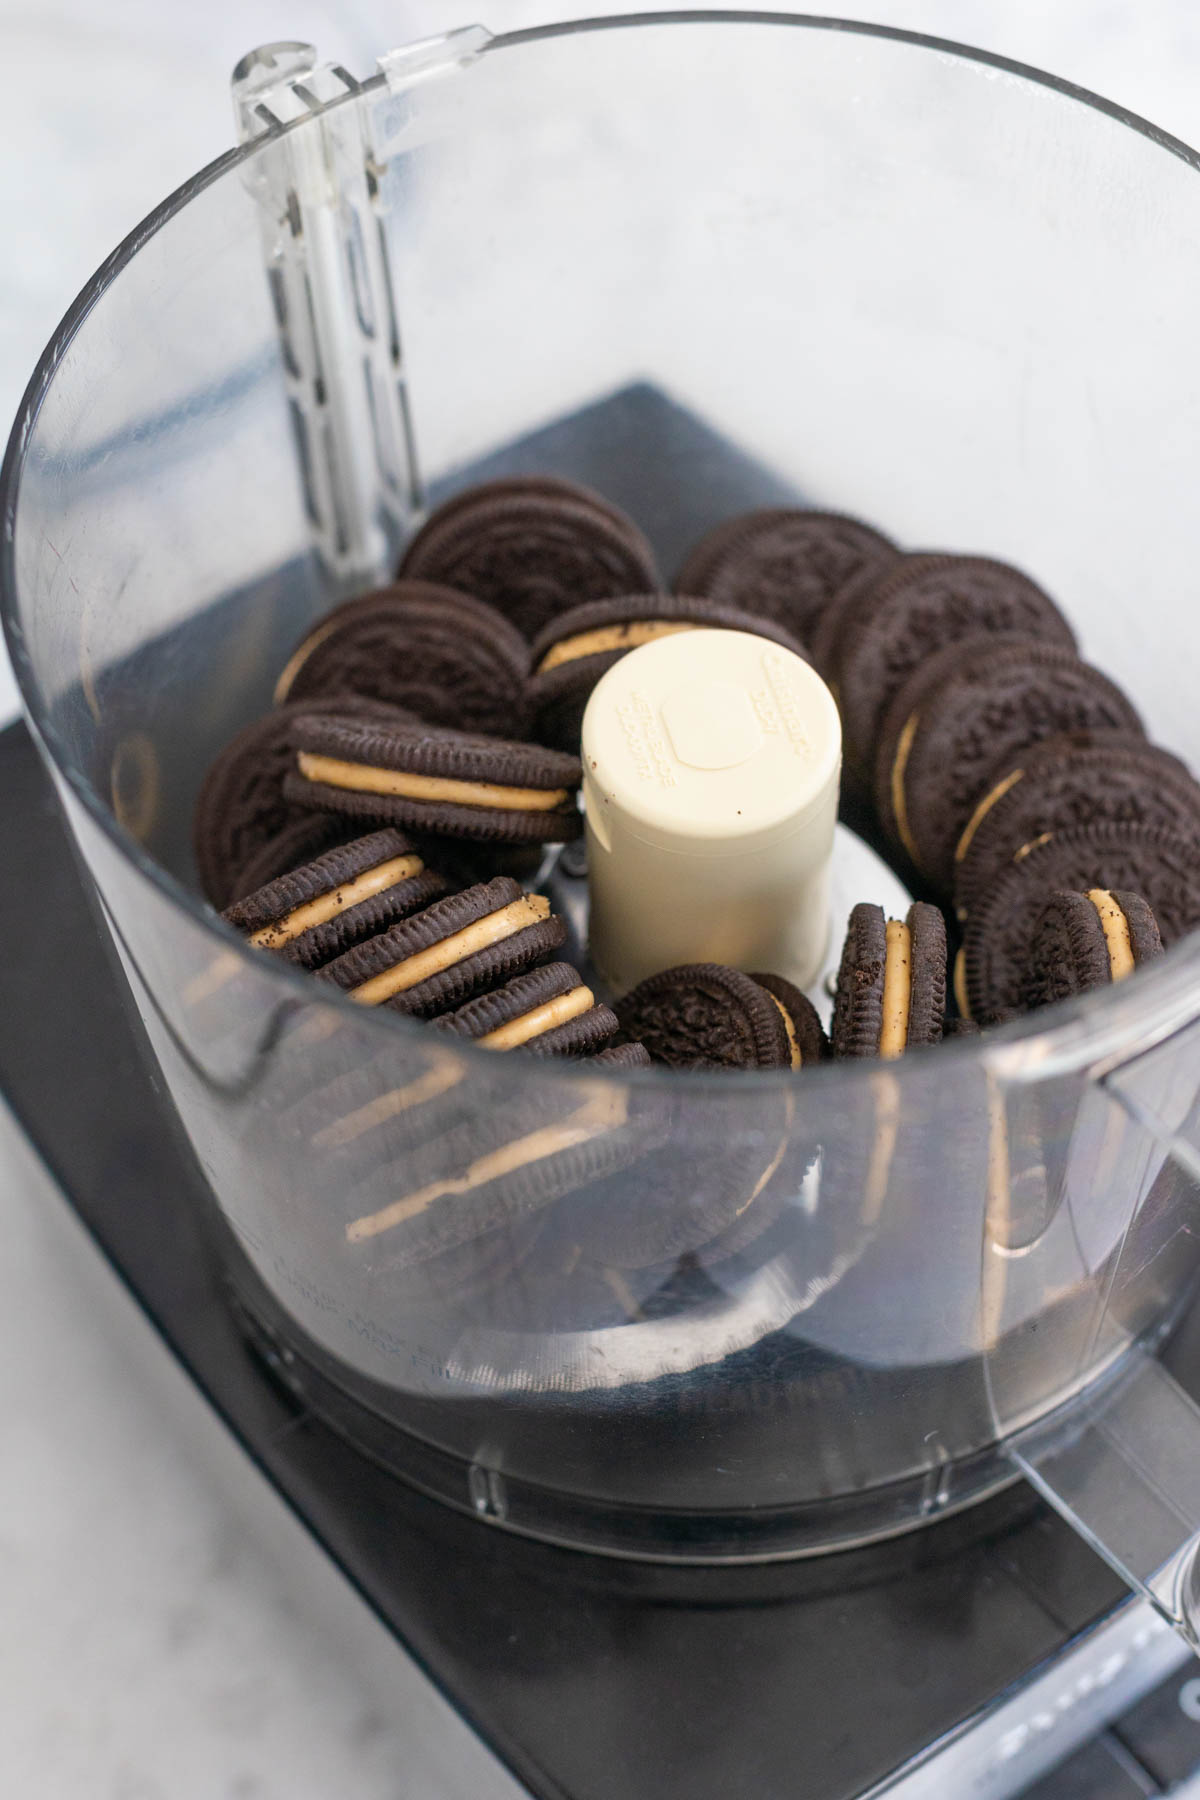 The food processor bowl is filled with peanut butter Oreo cookies about to be crushed.